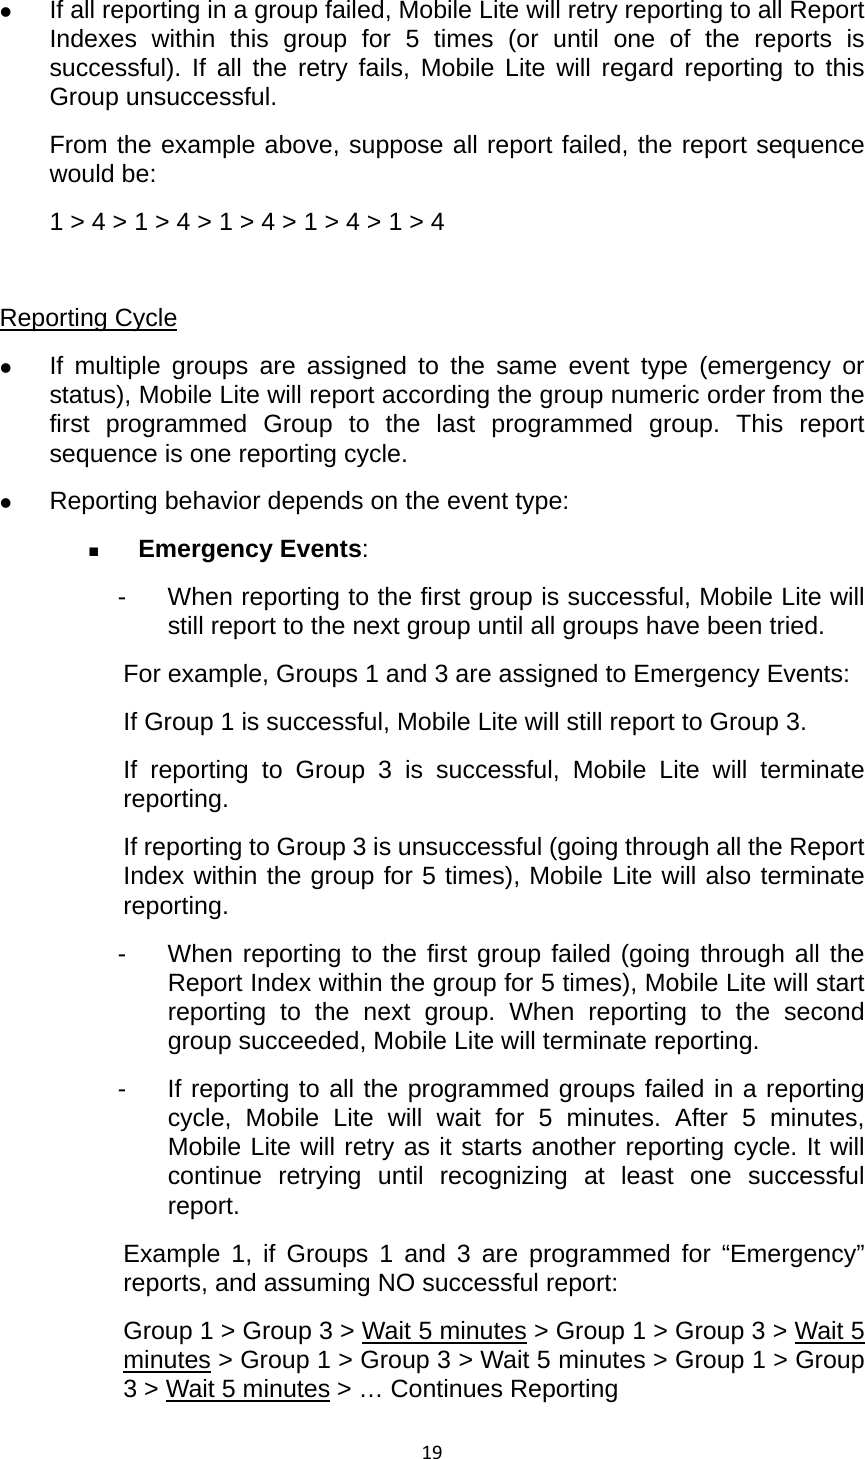 19 If all reporting in a group failed, Mobile Lite will retry reporting to all Report Indexes within this group for 5 times (or until one of the reports is successful). If all the retry fails, Mobile Lite will regard reporting to this Group unsuccessful. From the example above, suppose all report failed, the report sequence would be: 1 &gt; 4 &gt; 1 &gt; 4 &gt; 1 &gt; 4 &gt; 1 &gt; 4 &gt; 1 &gt; 4  Reporting Cycle  If multiple groups are assigned to the same event type (emergency or status), Mobile Lite will report according the group numeric order from the first programmed Group to the last programmed group. This report sequence is one reporting cycle.  Reporting behavior depends on the event type:  Emergency Events: -  When reporting to the first group is successful, Mobile Lite will still report to the next group until all groups have been tried. For example, Groups 1 and 3 are assigned to Emergency Events: If Group 1 is successful, Mobile Lite will still report to Group 3. If reporting to Group 3 is successful, Mobile Lite will terminate reporting. If reporting to Group 3 is unsuccessful (going through all the Report Index within the group for 5 times), Mobile Lite will also terminate reporting. -  When reporting to the first group failed (going through all the Report Index within the group for 5 times), Mobile Lite will start reporting to the next group. When reporting to the second group succeeded, Mobile Lite will terminate reporting. -  If reporting to all the programmed groups failed in a reporting cycle, Mobile Lite will wait for 5 minutes. After 5 minutes, Mobile Lite will retry as it starts another reporting cycle. It will continue retrying until recognizing at least one successful report. Example 1, if Groups 1 and 3 are programmed for “Emergency” reports, and assuming NO successful report: Group 1 &gt; Group 3 &gt; Wait 5 minutes &gt; Group 1 &gt; Group 3 &gt; Wait 5 minutes &gt; Group 1 &gt; Group 3 &gt; Wait 5 minutes &gt; Group 1 &gt; Group 3 &gt; Wait 5 minutes &gt; … Continues Reporting 